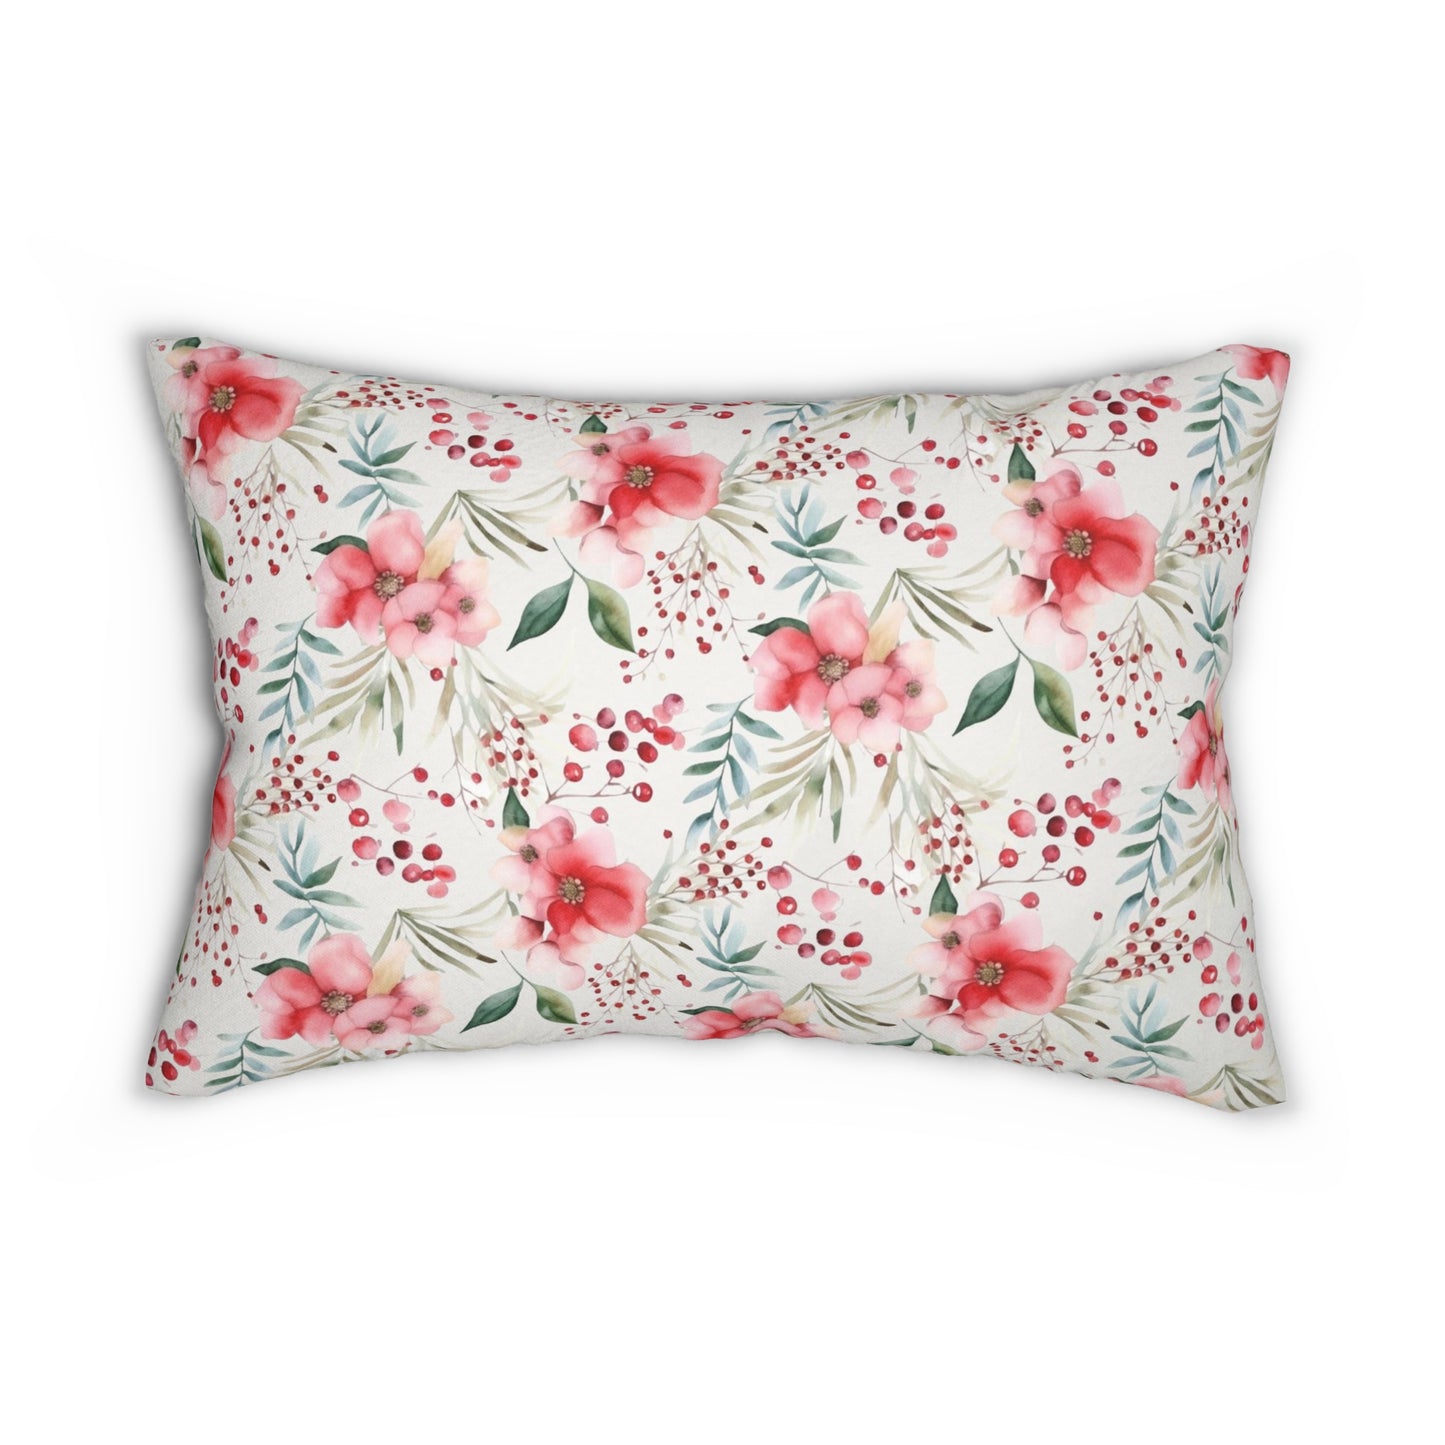 Floral and Cranberries- Lumbar Pillow or Breastfeeding